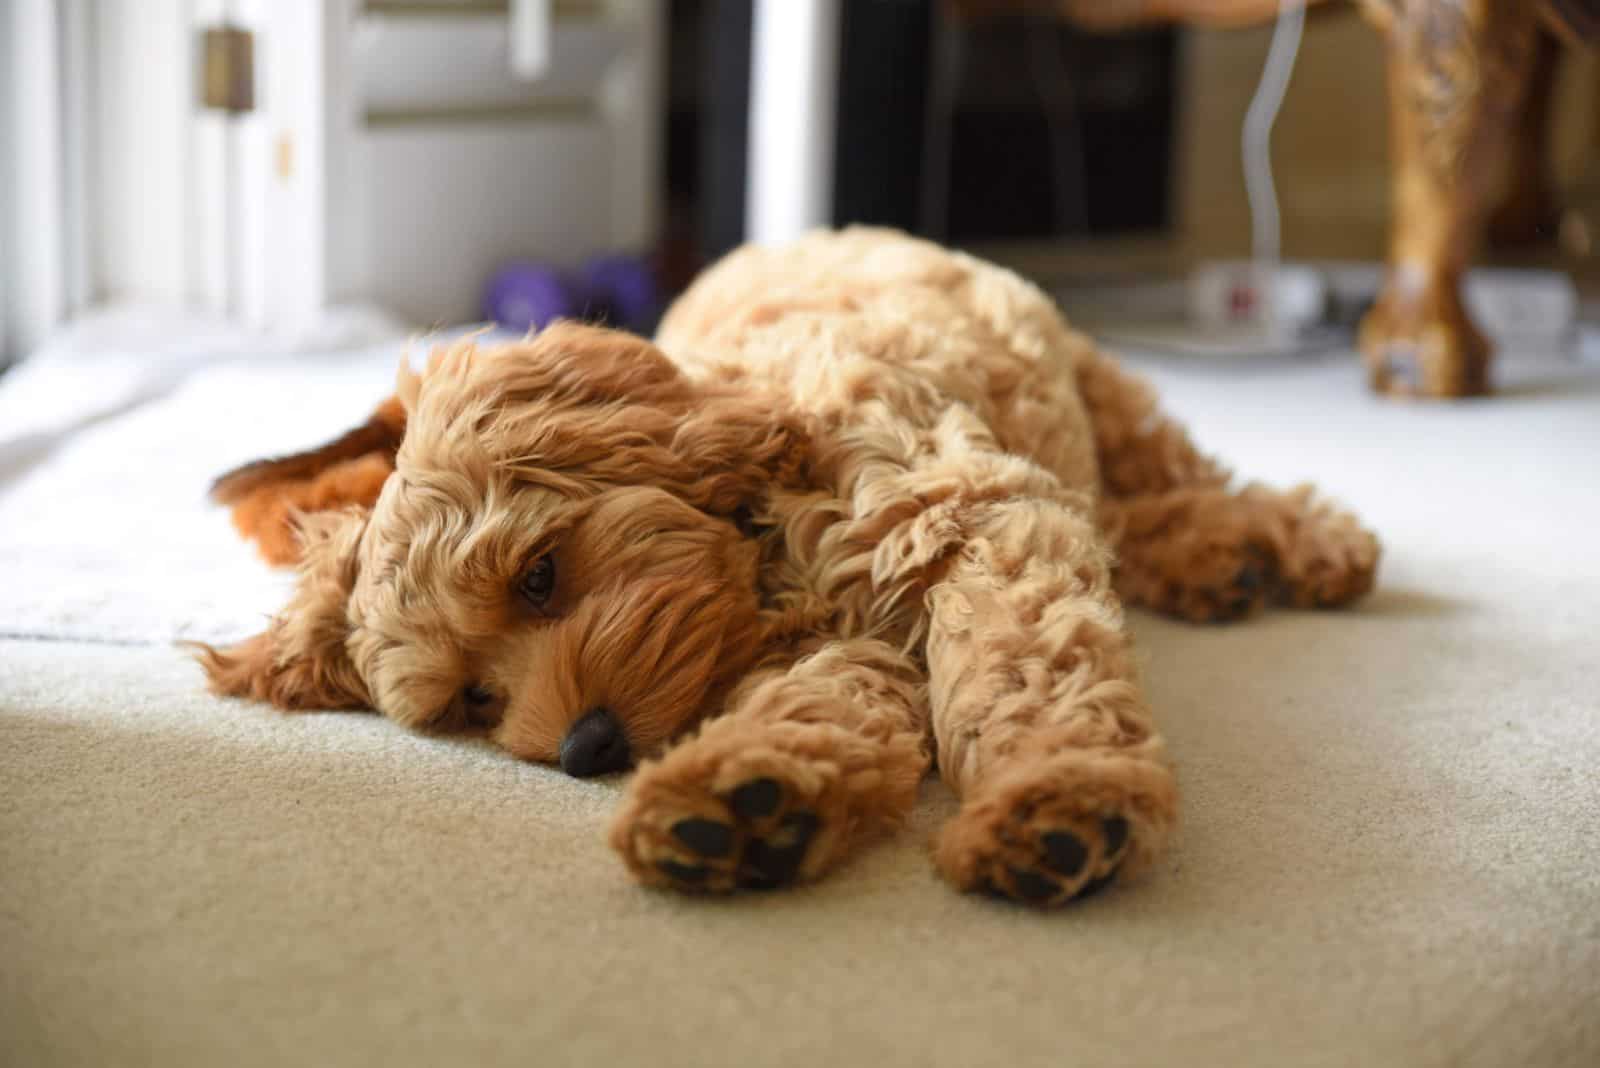 Is Your Dog Rubbing Its Face On The Carpet? — 15 Possible Reasons